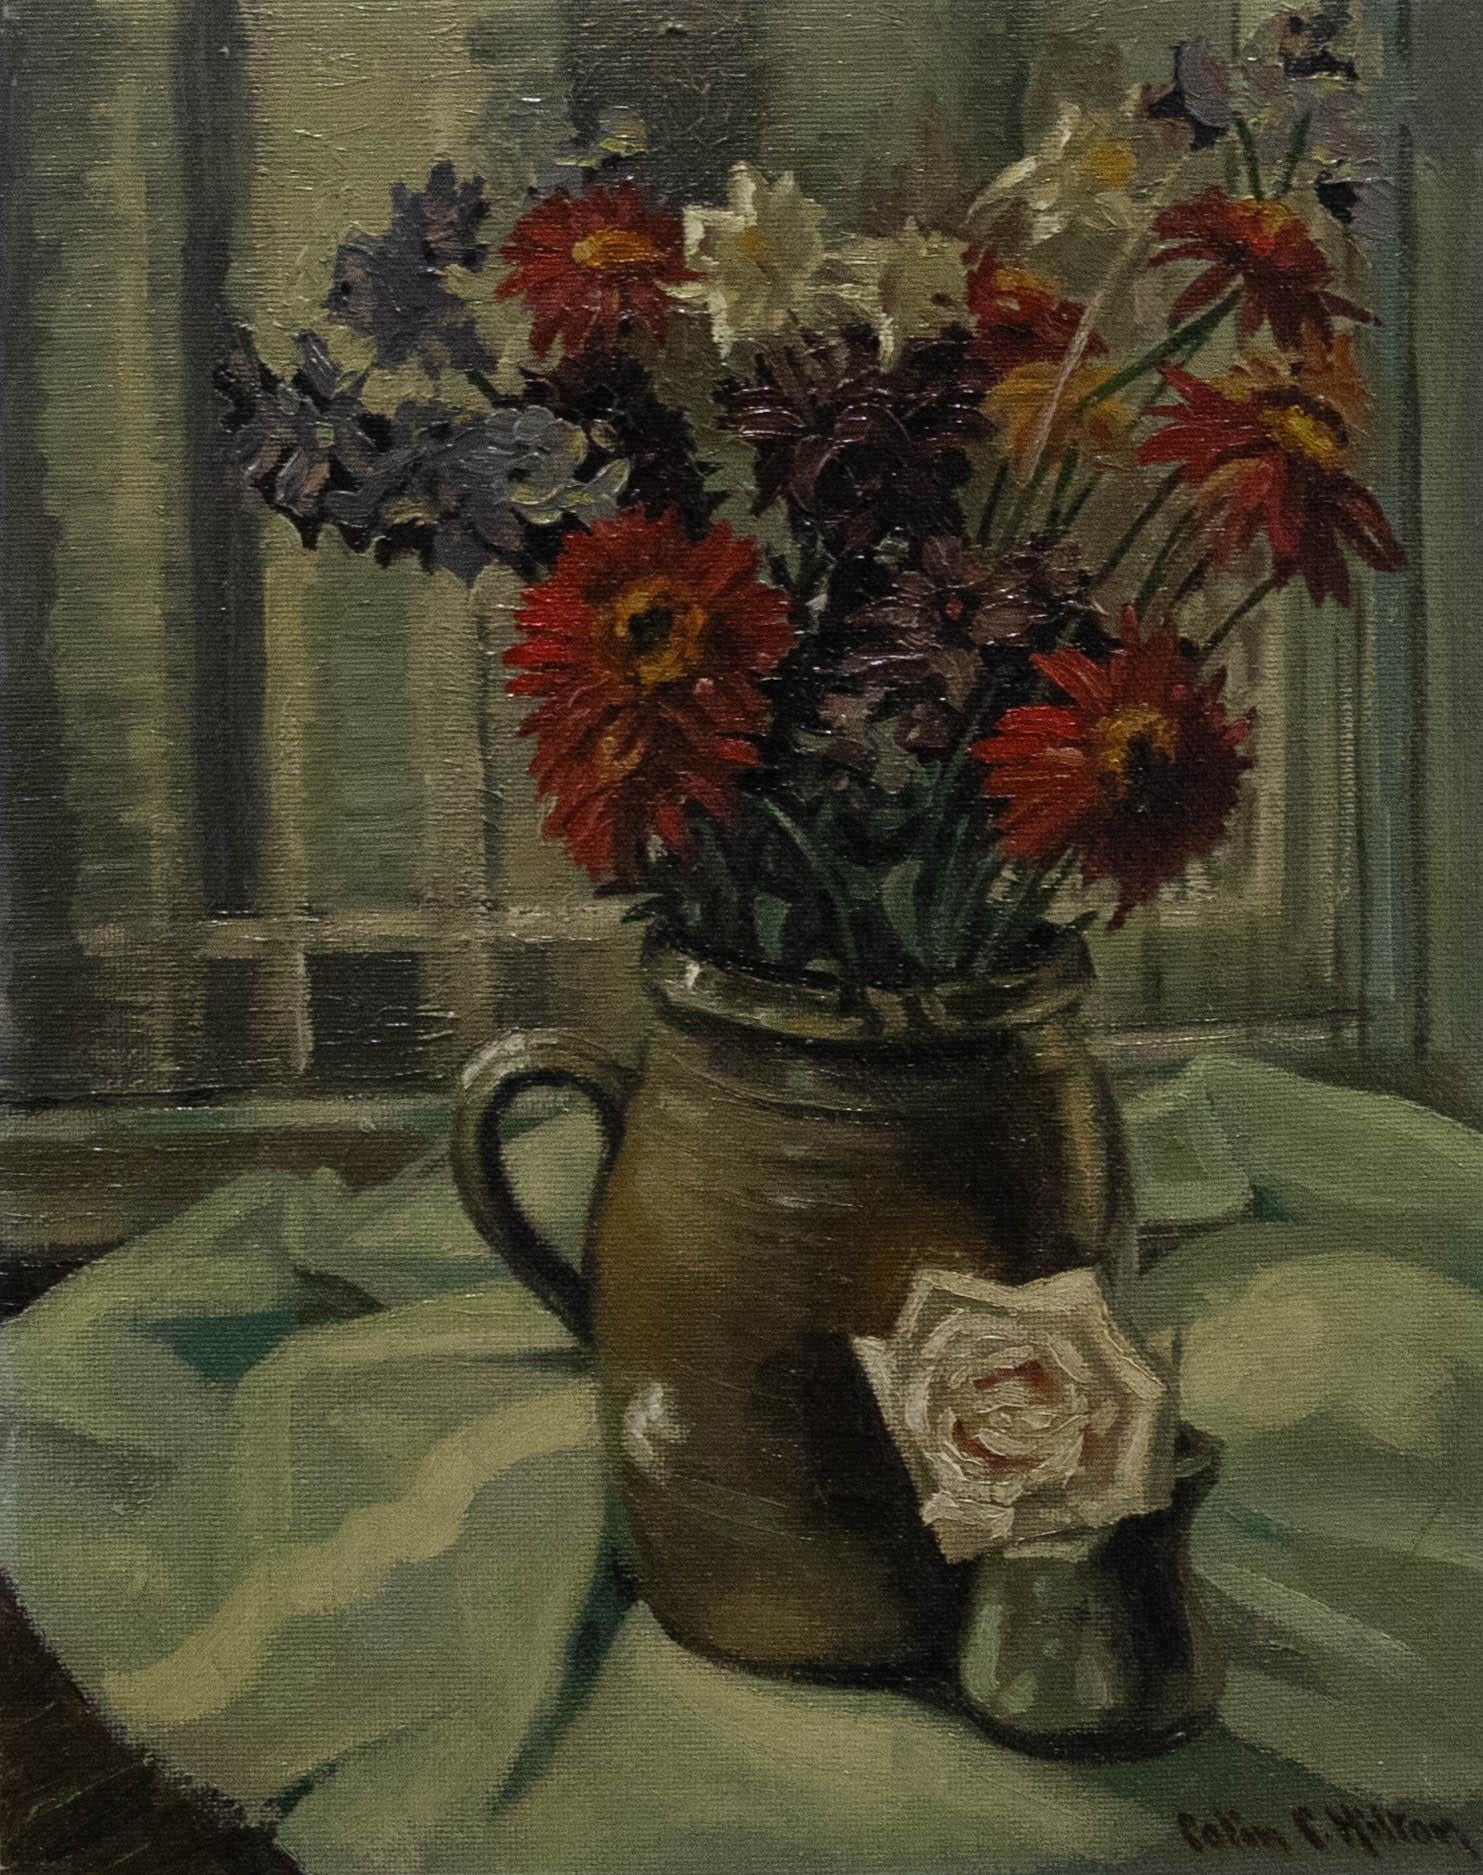 A delightful floral still life by Colin Clough Hilton (1902-1984). Painted in an impressionist manner with energetic brush work. Signed to the lower right. With a Lancashire Group of Artists label verso. On canvas laid to board.